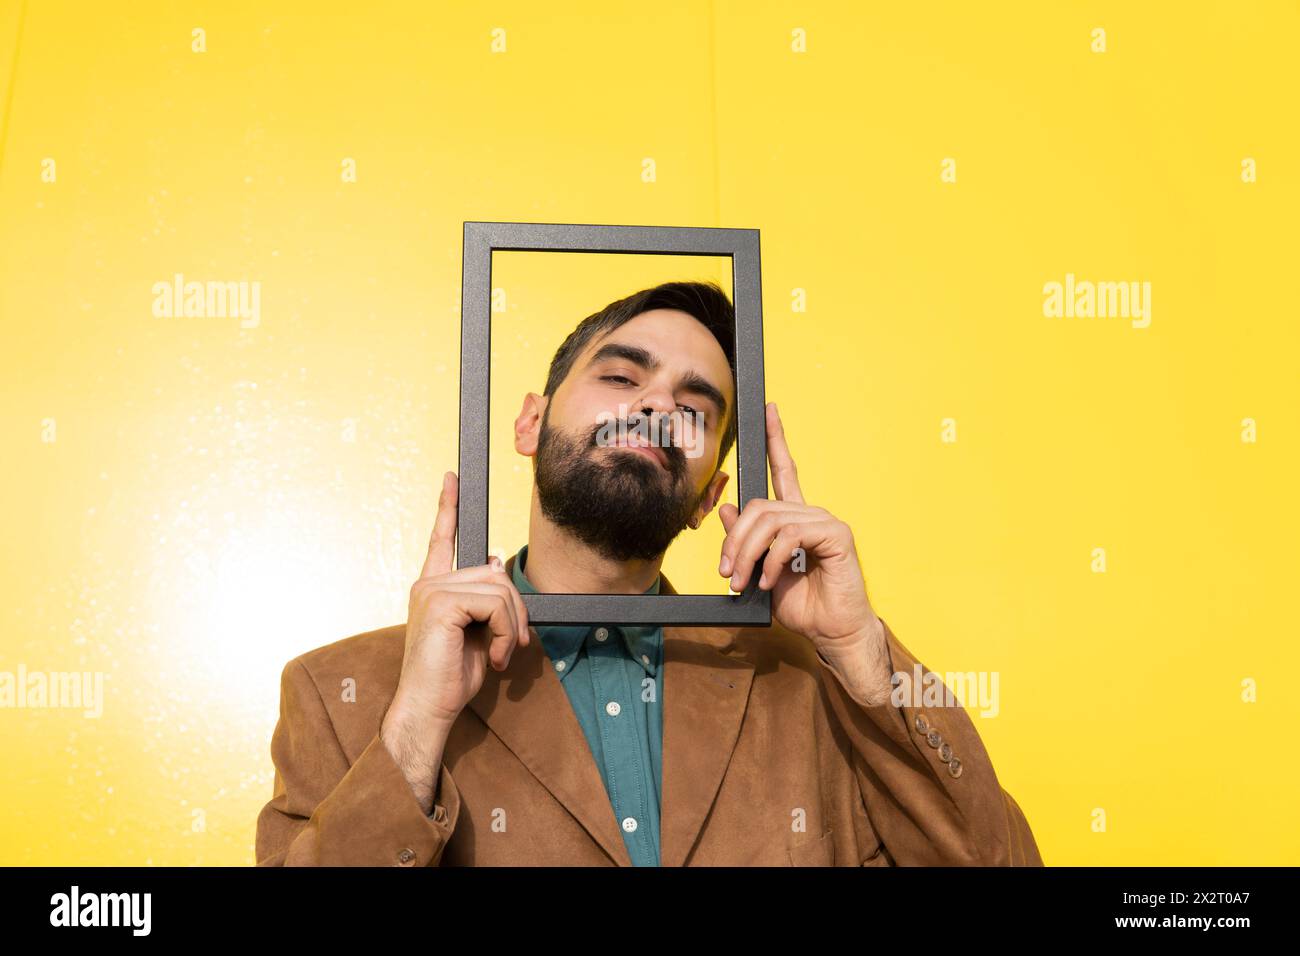 Man wearing brown jacket and looking through photo frame Stock Photo